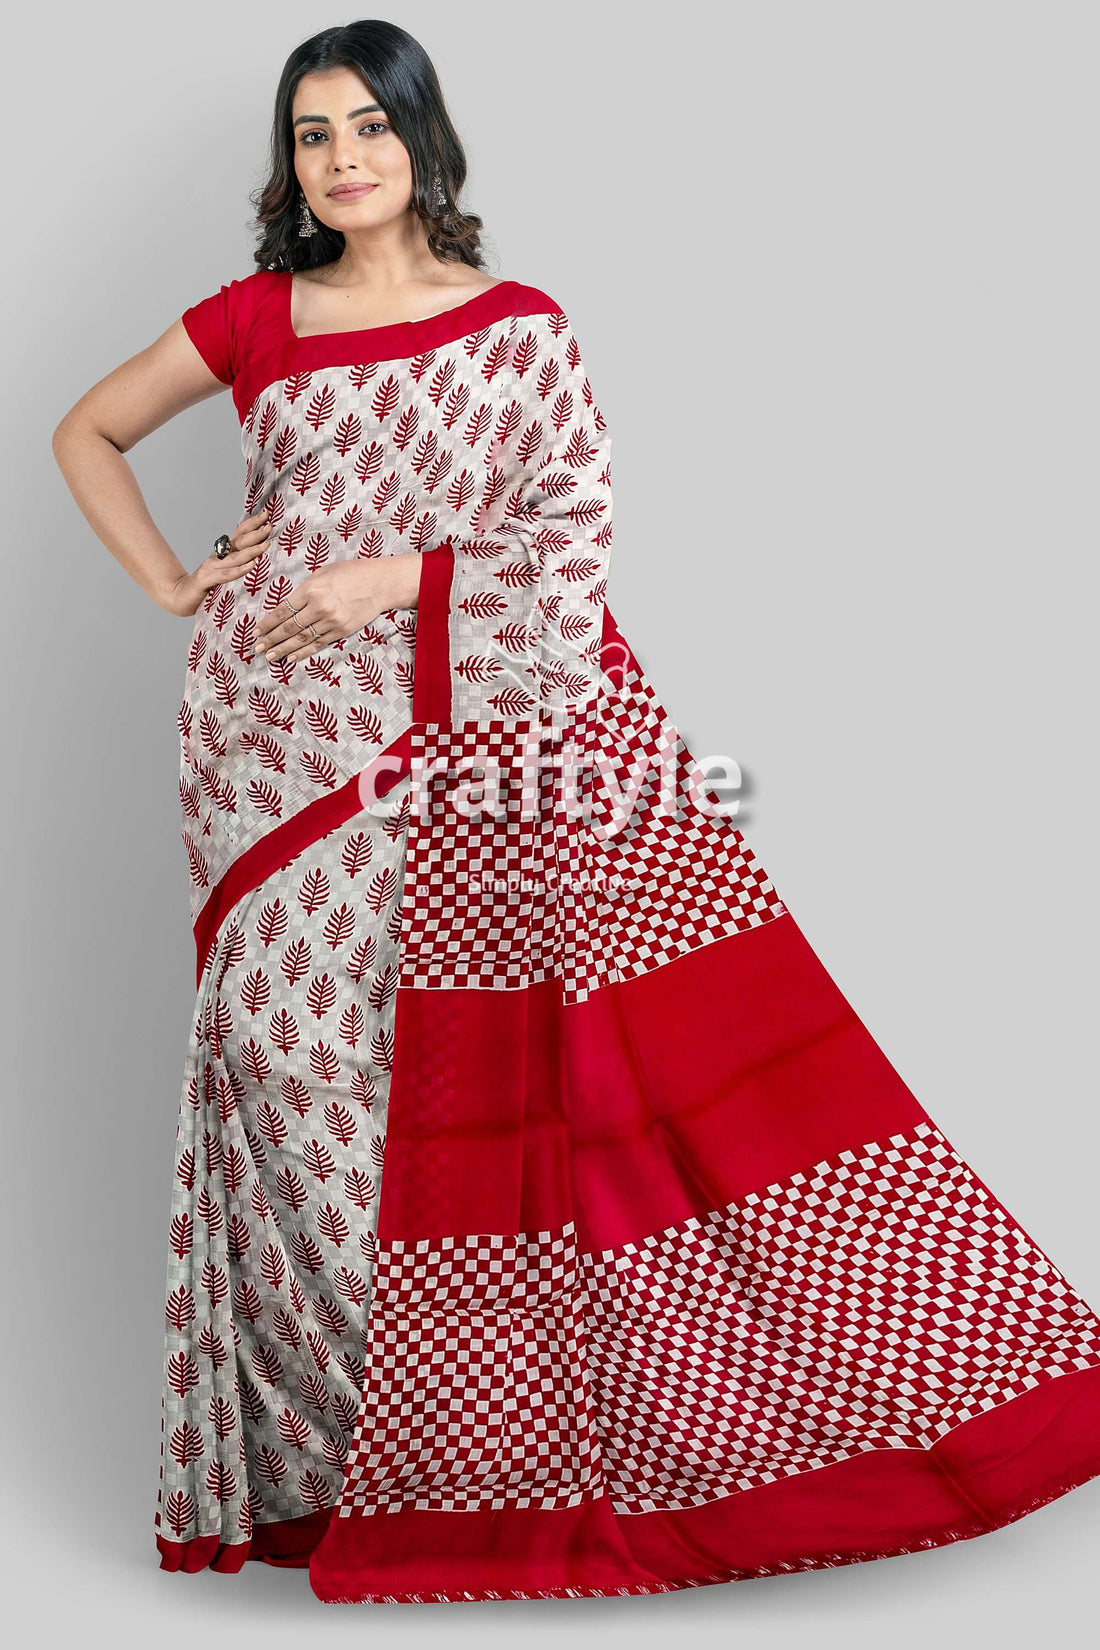 Handcrafted Murshidabad Pure Silk Saree in Sizzling Red White Block Print Design-Craftyle